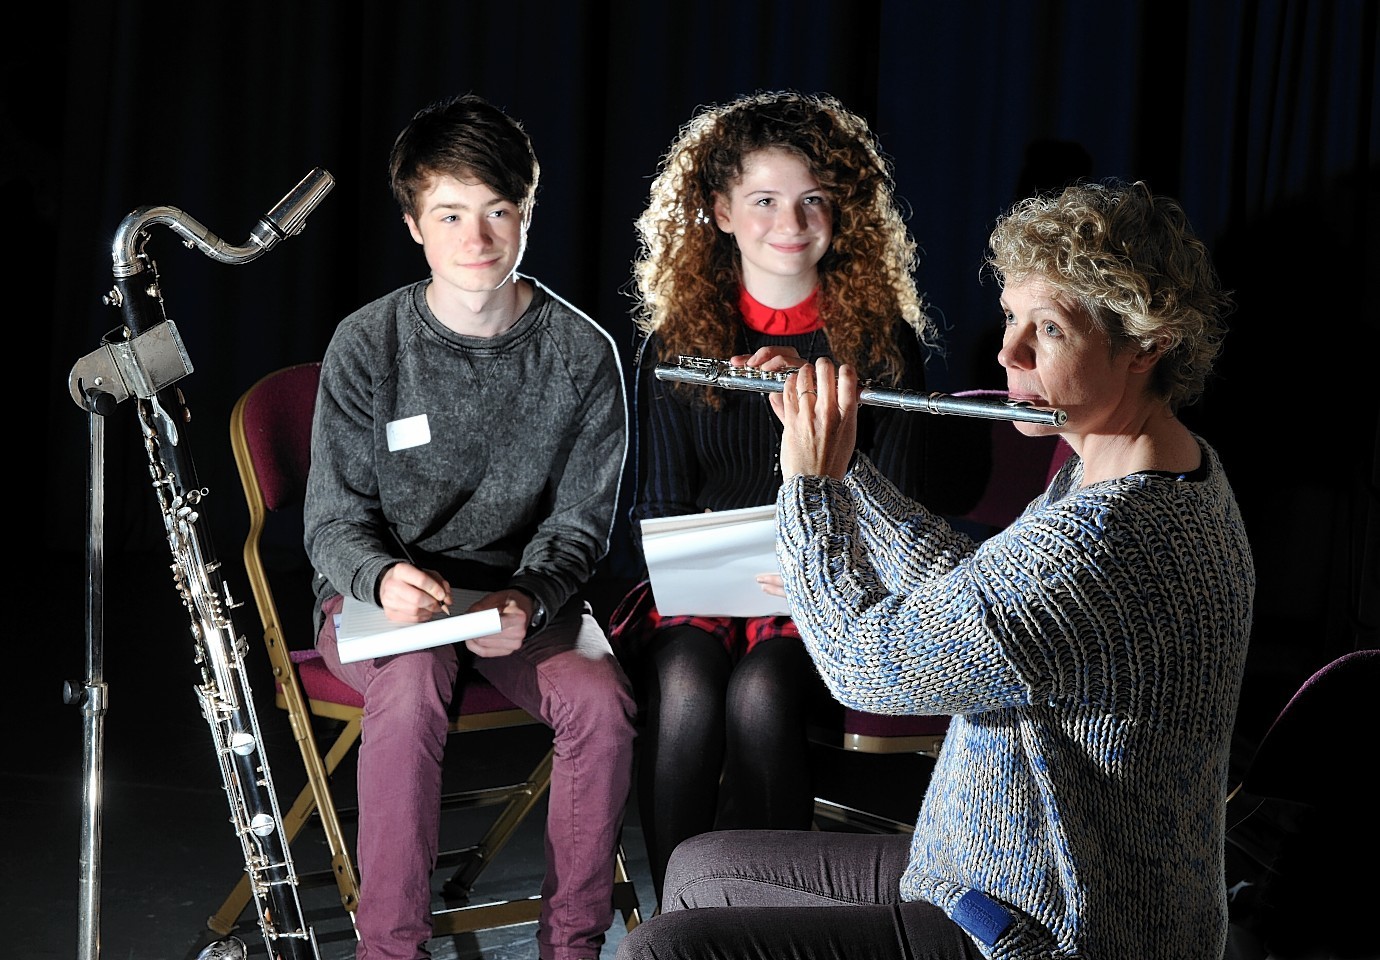 Isaac Barnes and Zakia Fawcett listening to professional musician Ruth Morley at a workshop at Woodend Barn. Youngsters from across the north-east are learning how to compose music as part of the Sound Festival.